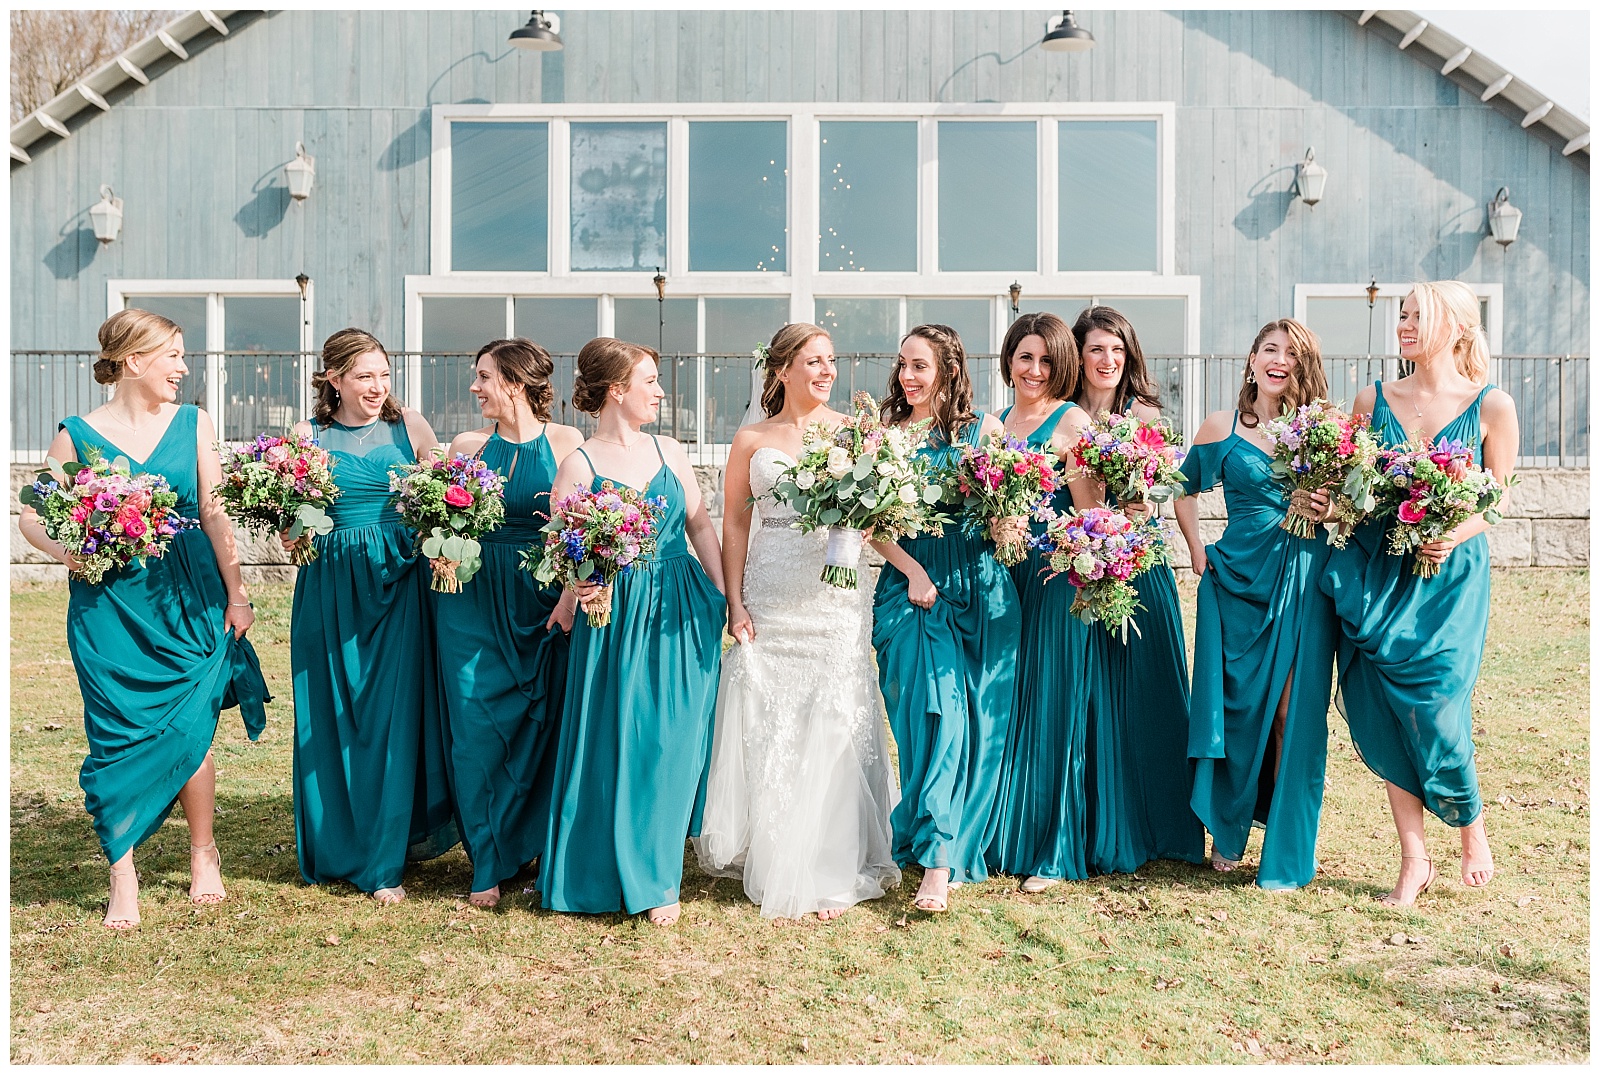 Bridesmaids wearing teal dresses holding colorful bouquets, walking and laughing next to the bride.